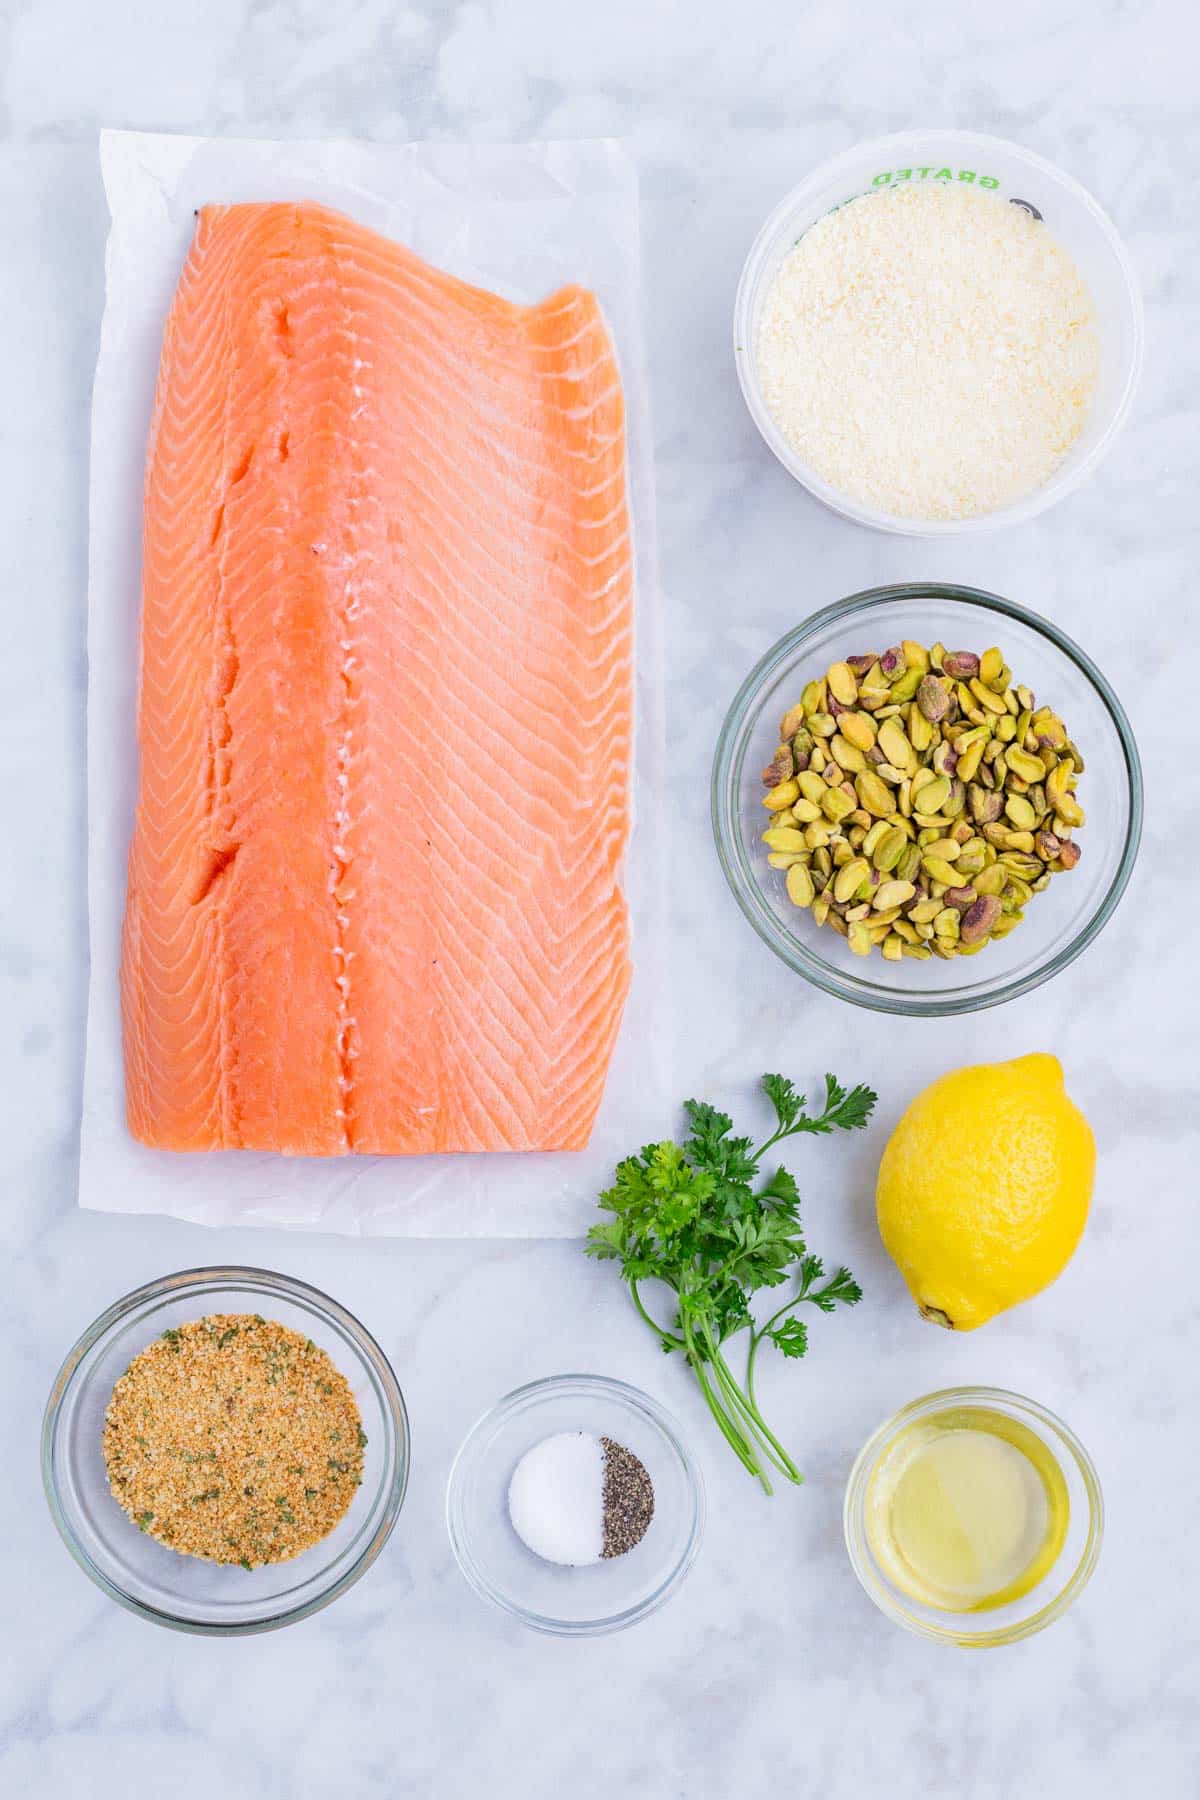 The ingredients for this dish are salmon, pistachios, lemon, breadcrumbs, and herbs.